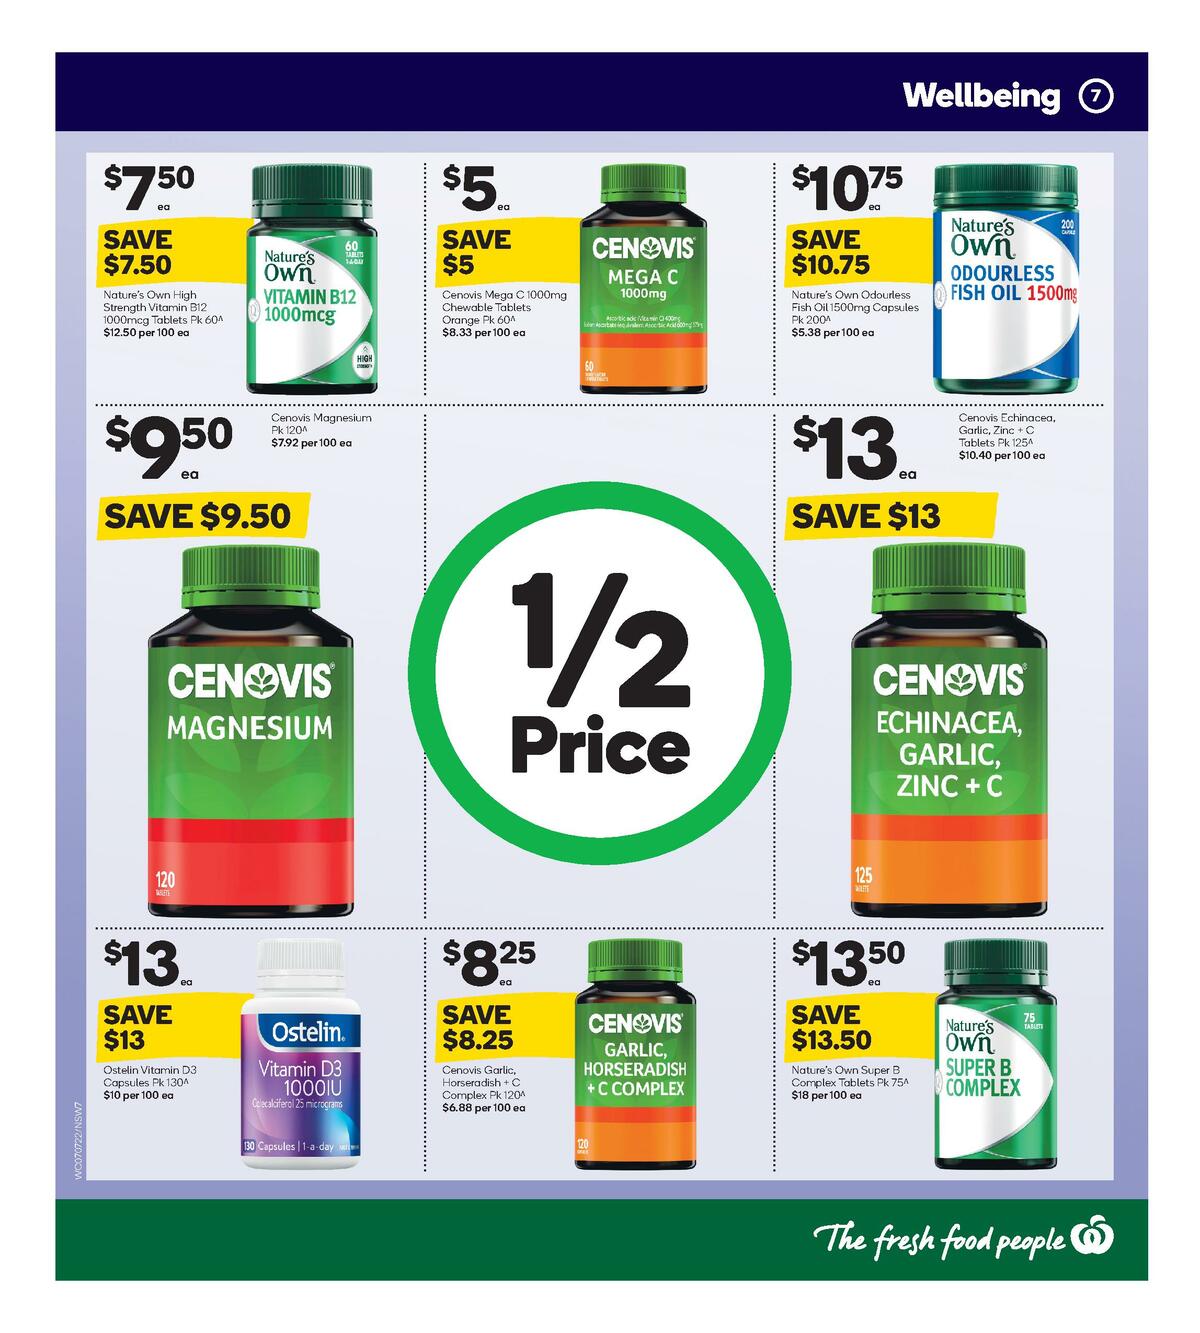 Woolworths Health & Beauty Catalogues from 7 July